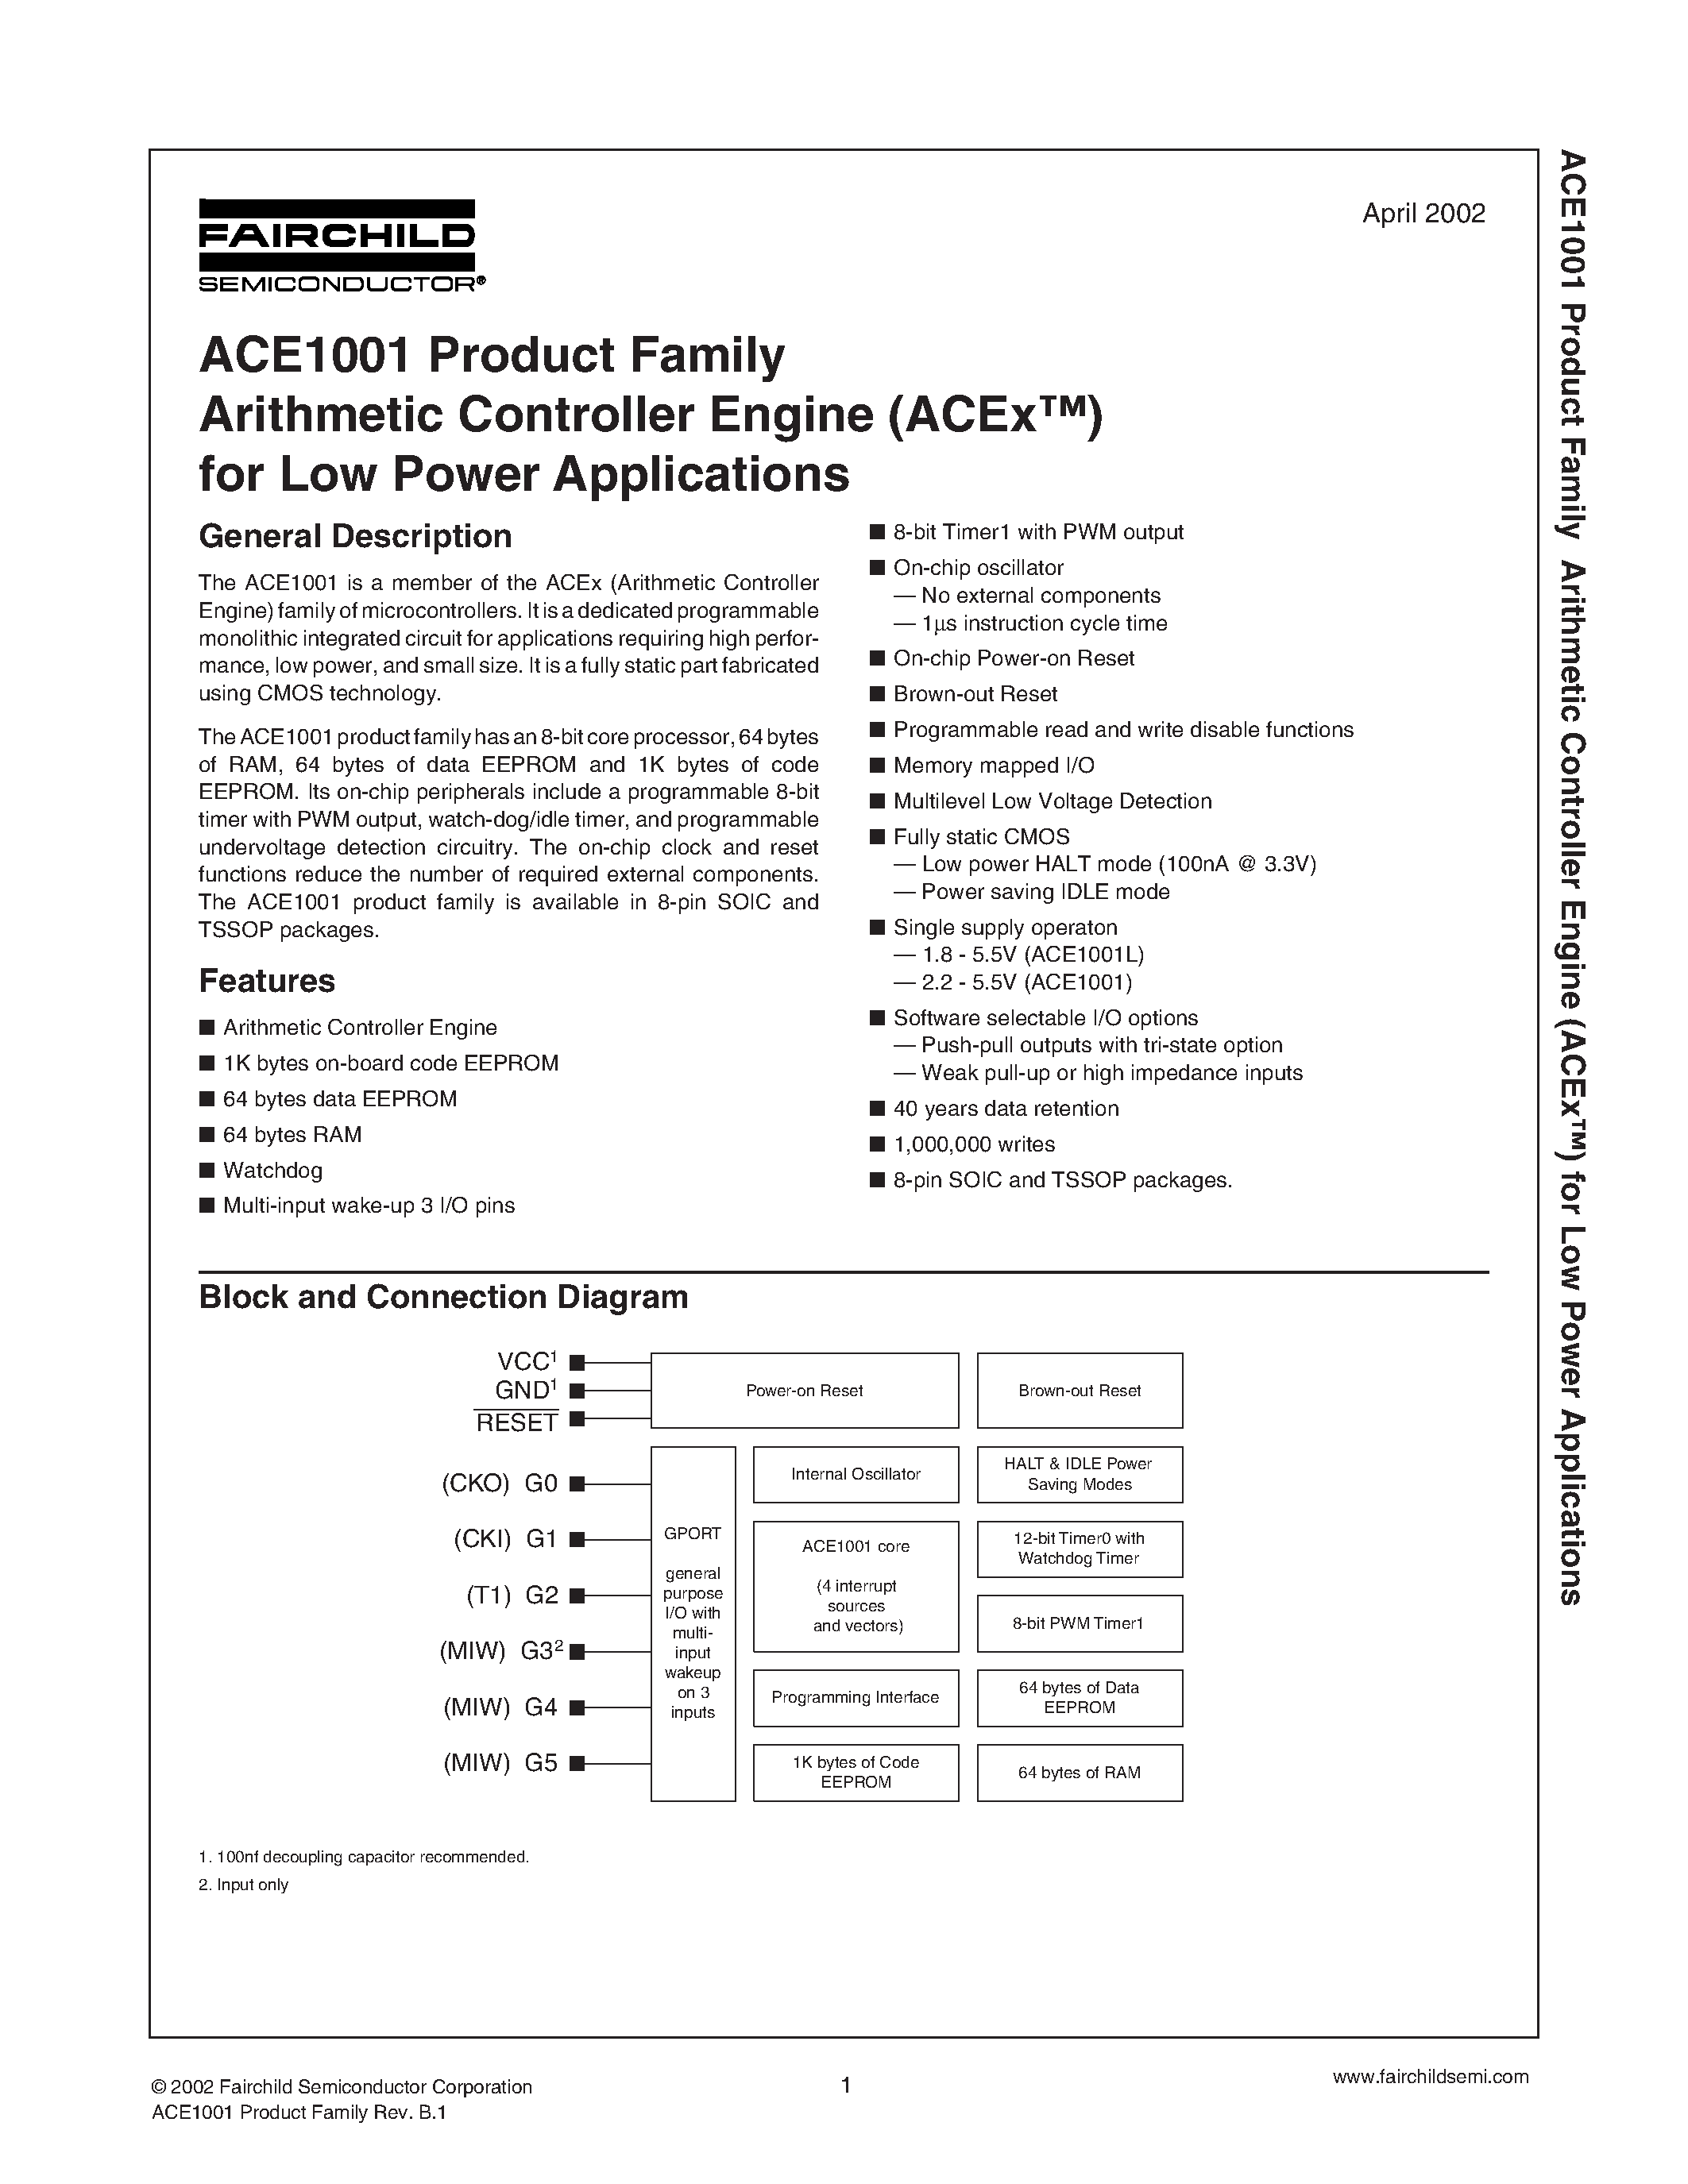 Datasheet ACE1001L - Arithmetic Controller Engine (ACEx) for Low Power Applications page 1